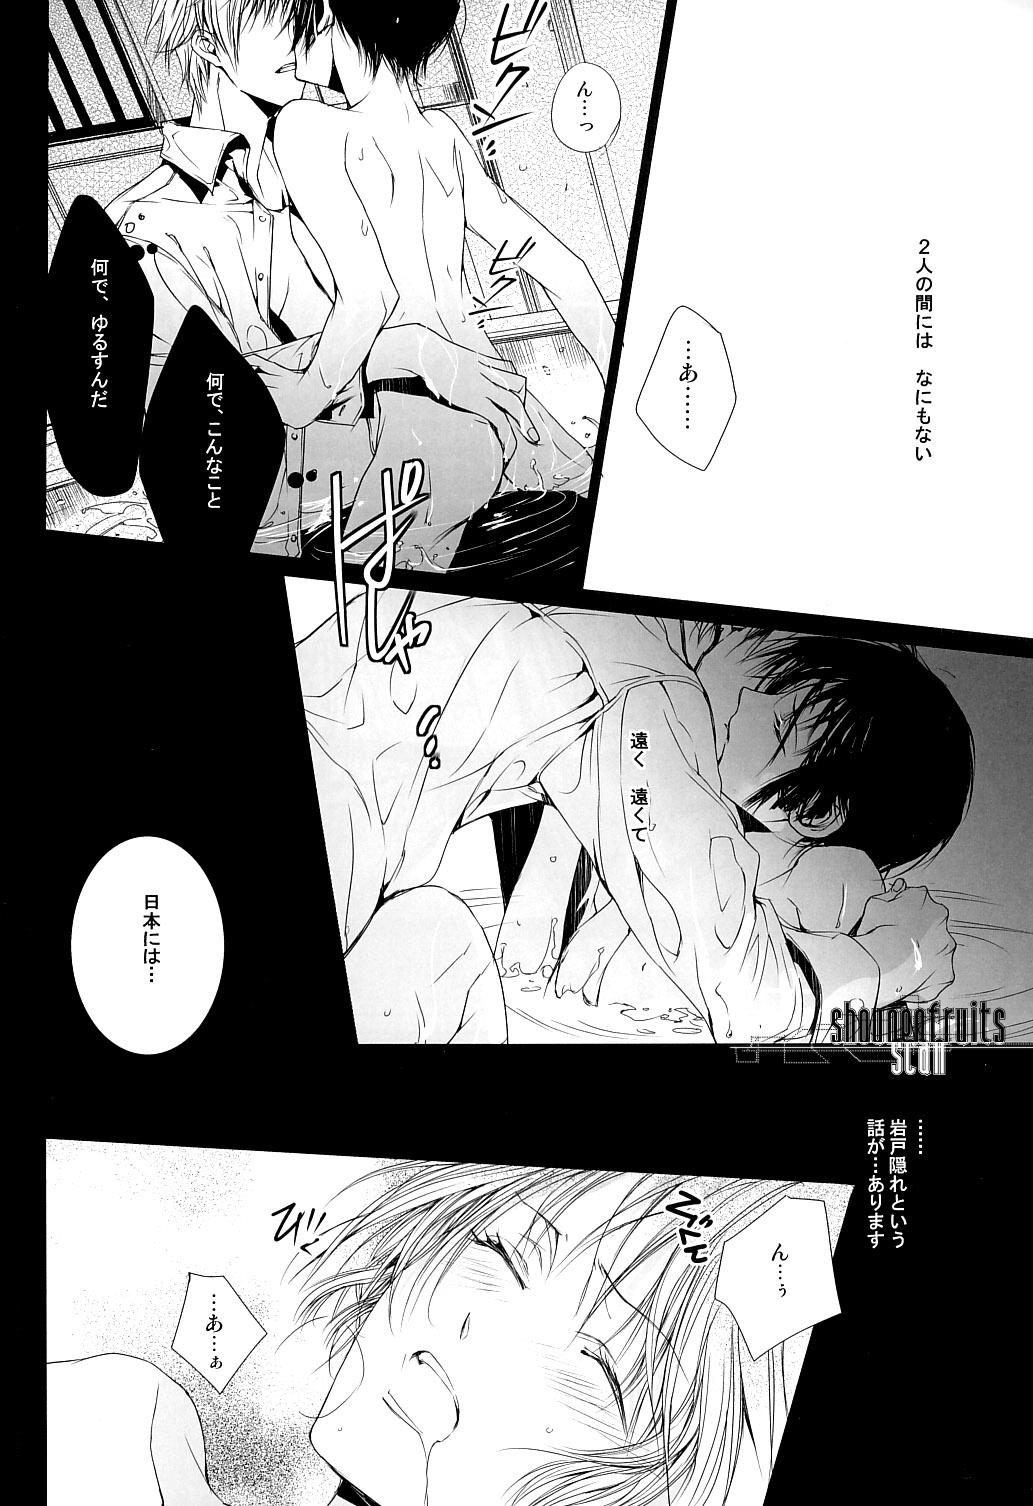 Whipping Total Eclipse - Axis powers hetalia Emo Gay - Page 11